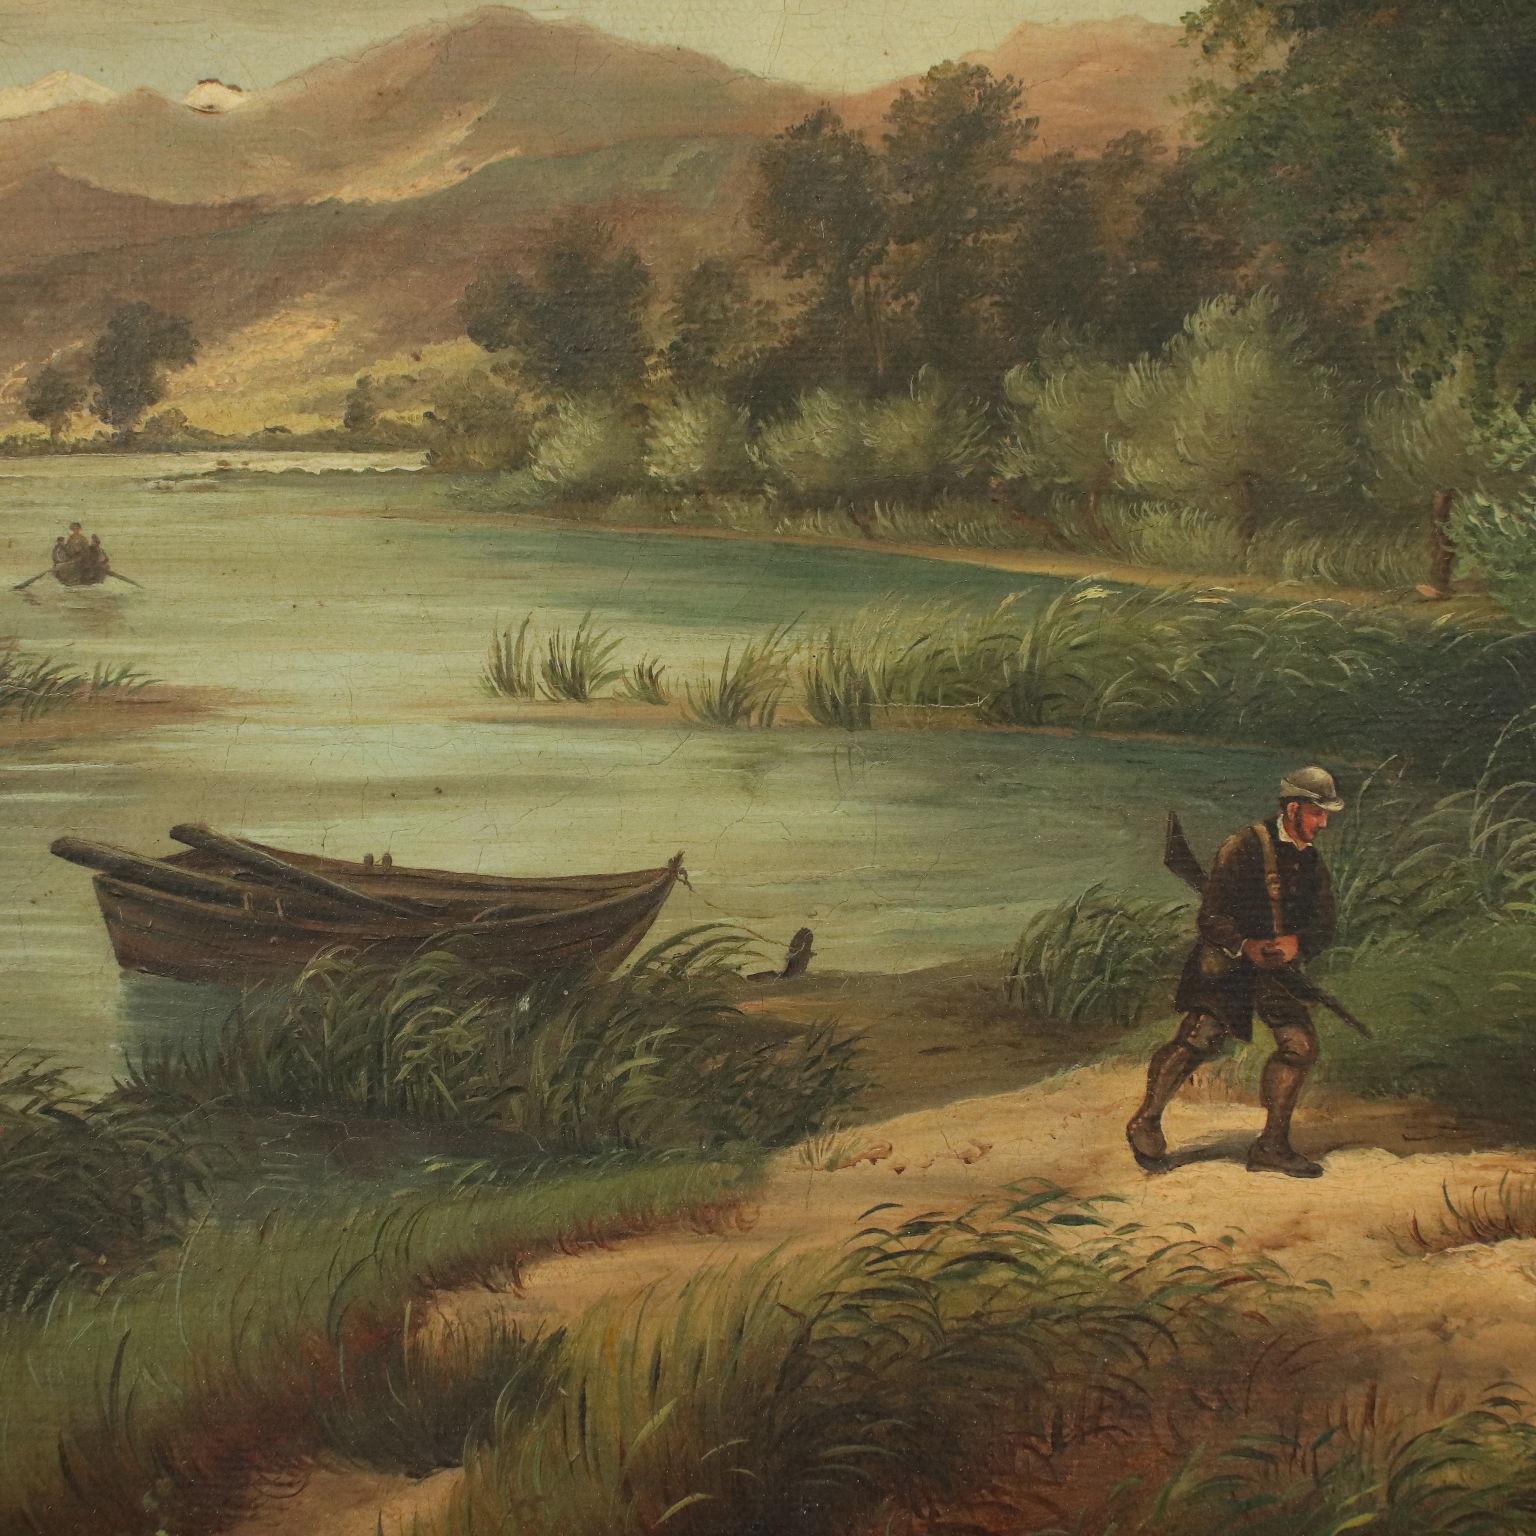 Oil on canvas. The romantic landscape portrays a verdant countryside near a river, under a leaden sky full of grey clouds; on the trail in the foreground, some hunters, right off the moored boat, follow their dogs towards the stand of trees.
The